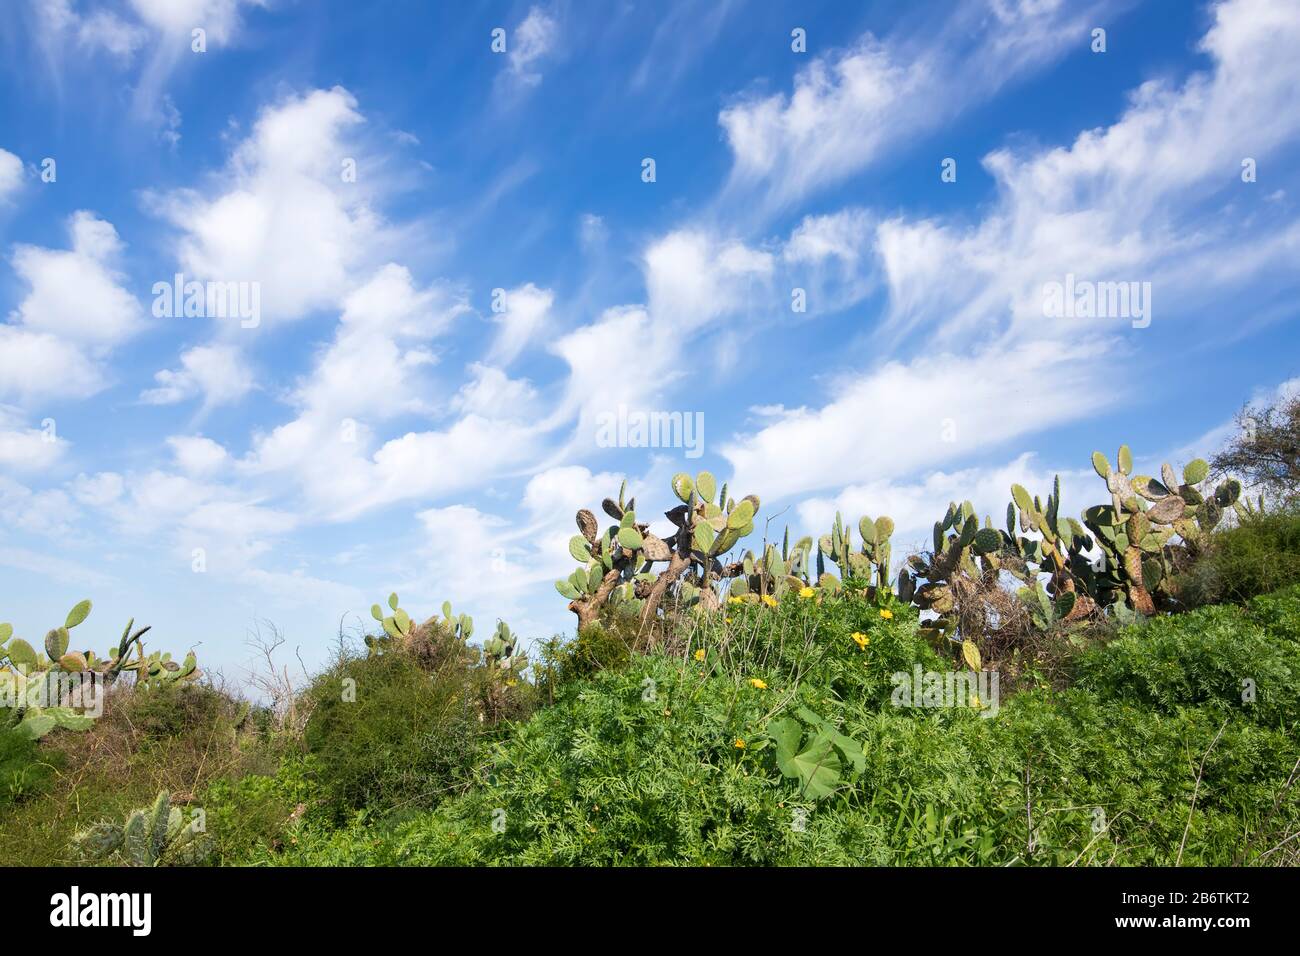 Flowering plants and Sabra cactuses on a background of blue sky with clouds. Israel Stock Photo